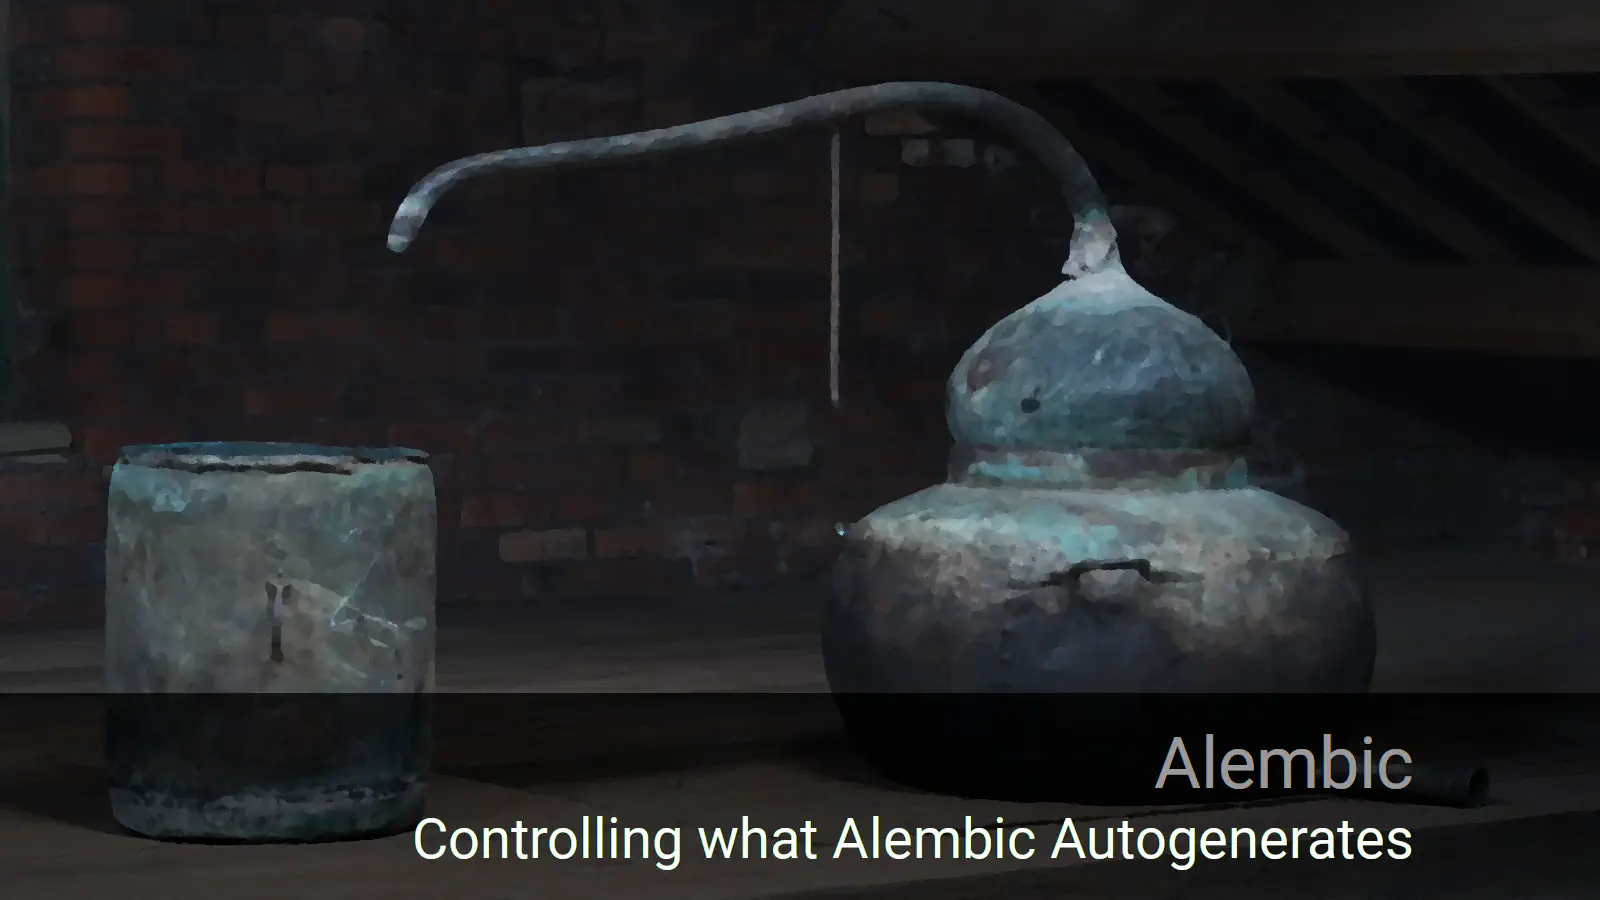 Controlling what Alembic Autogenerates